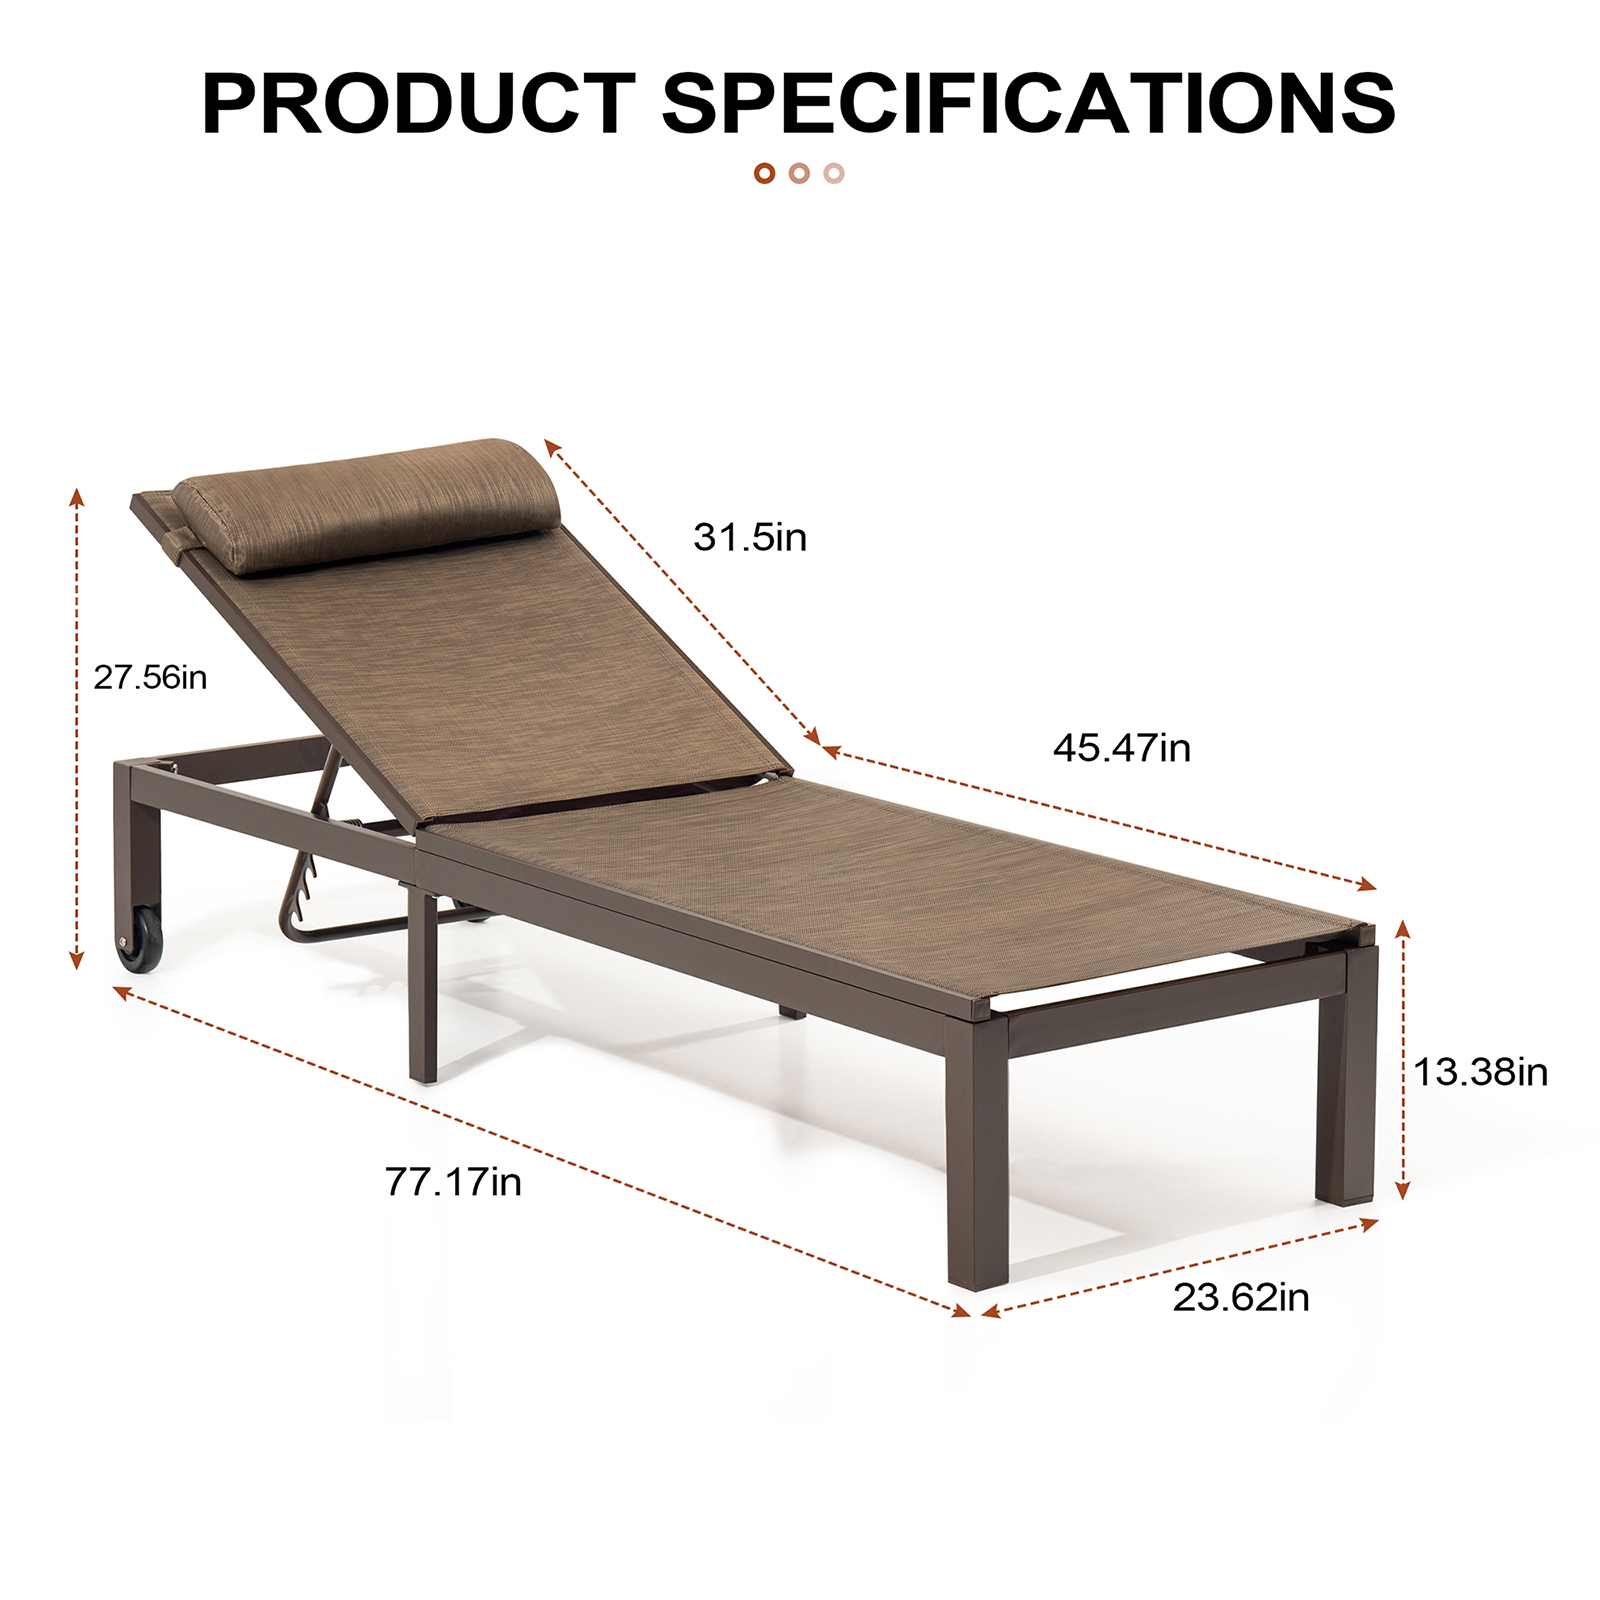 Crestlive Products Brown  Aluminium Adjustable Patio Pool Chaise Lounge Chairs (Set of 2) - image 2 of 7